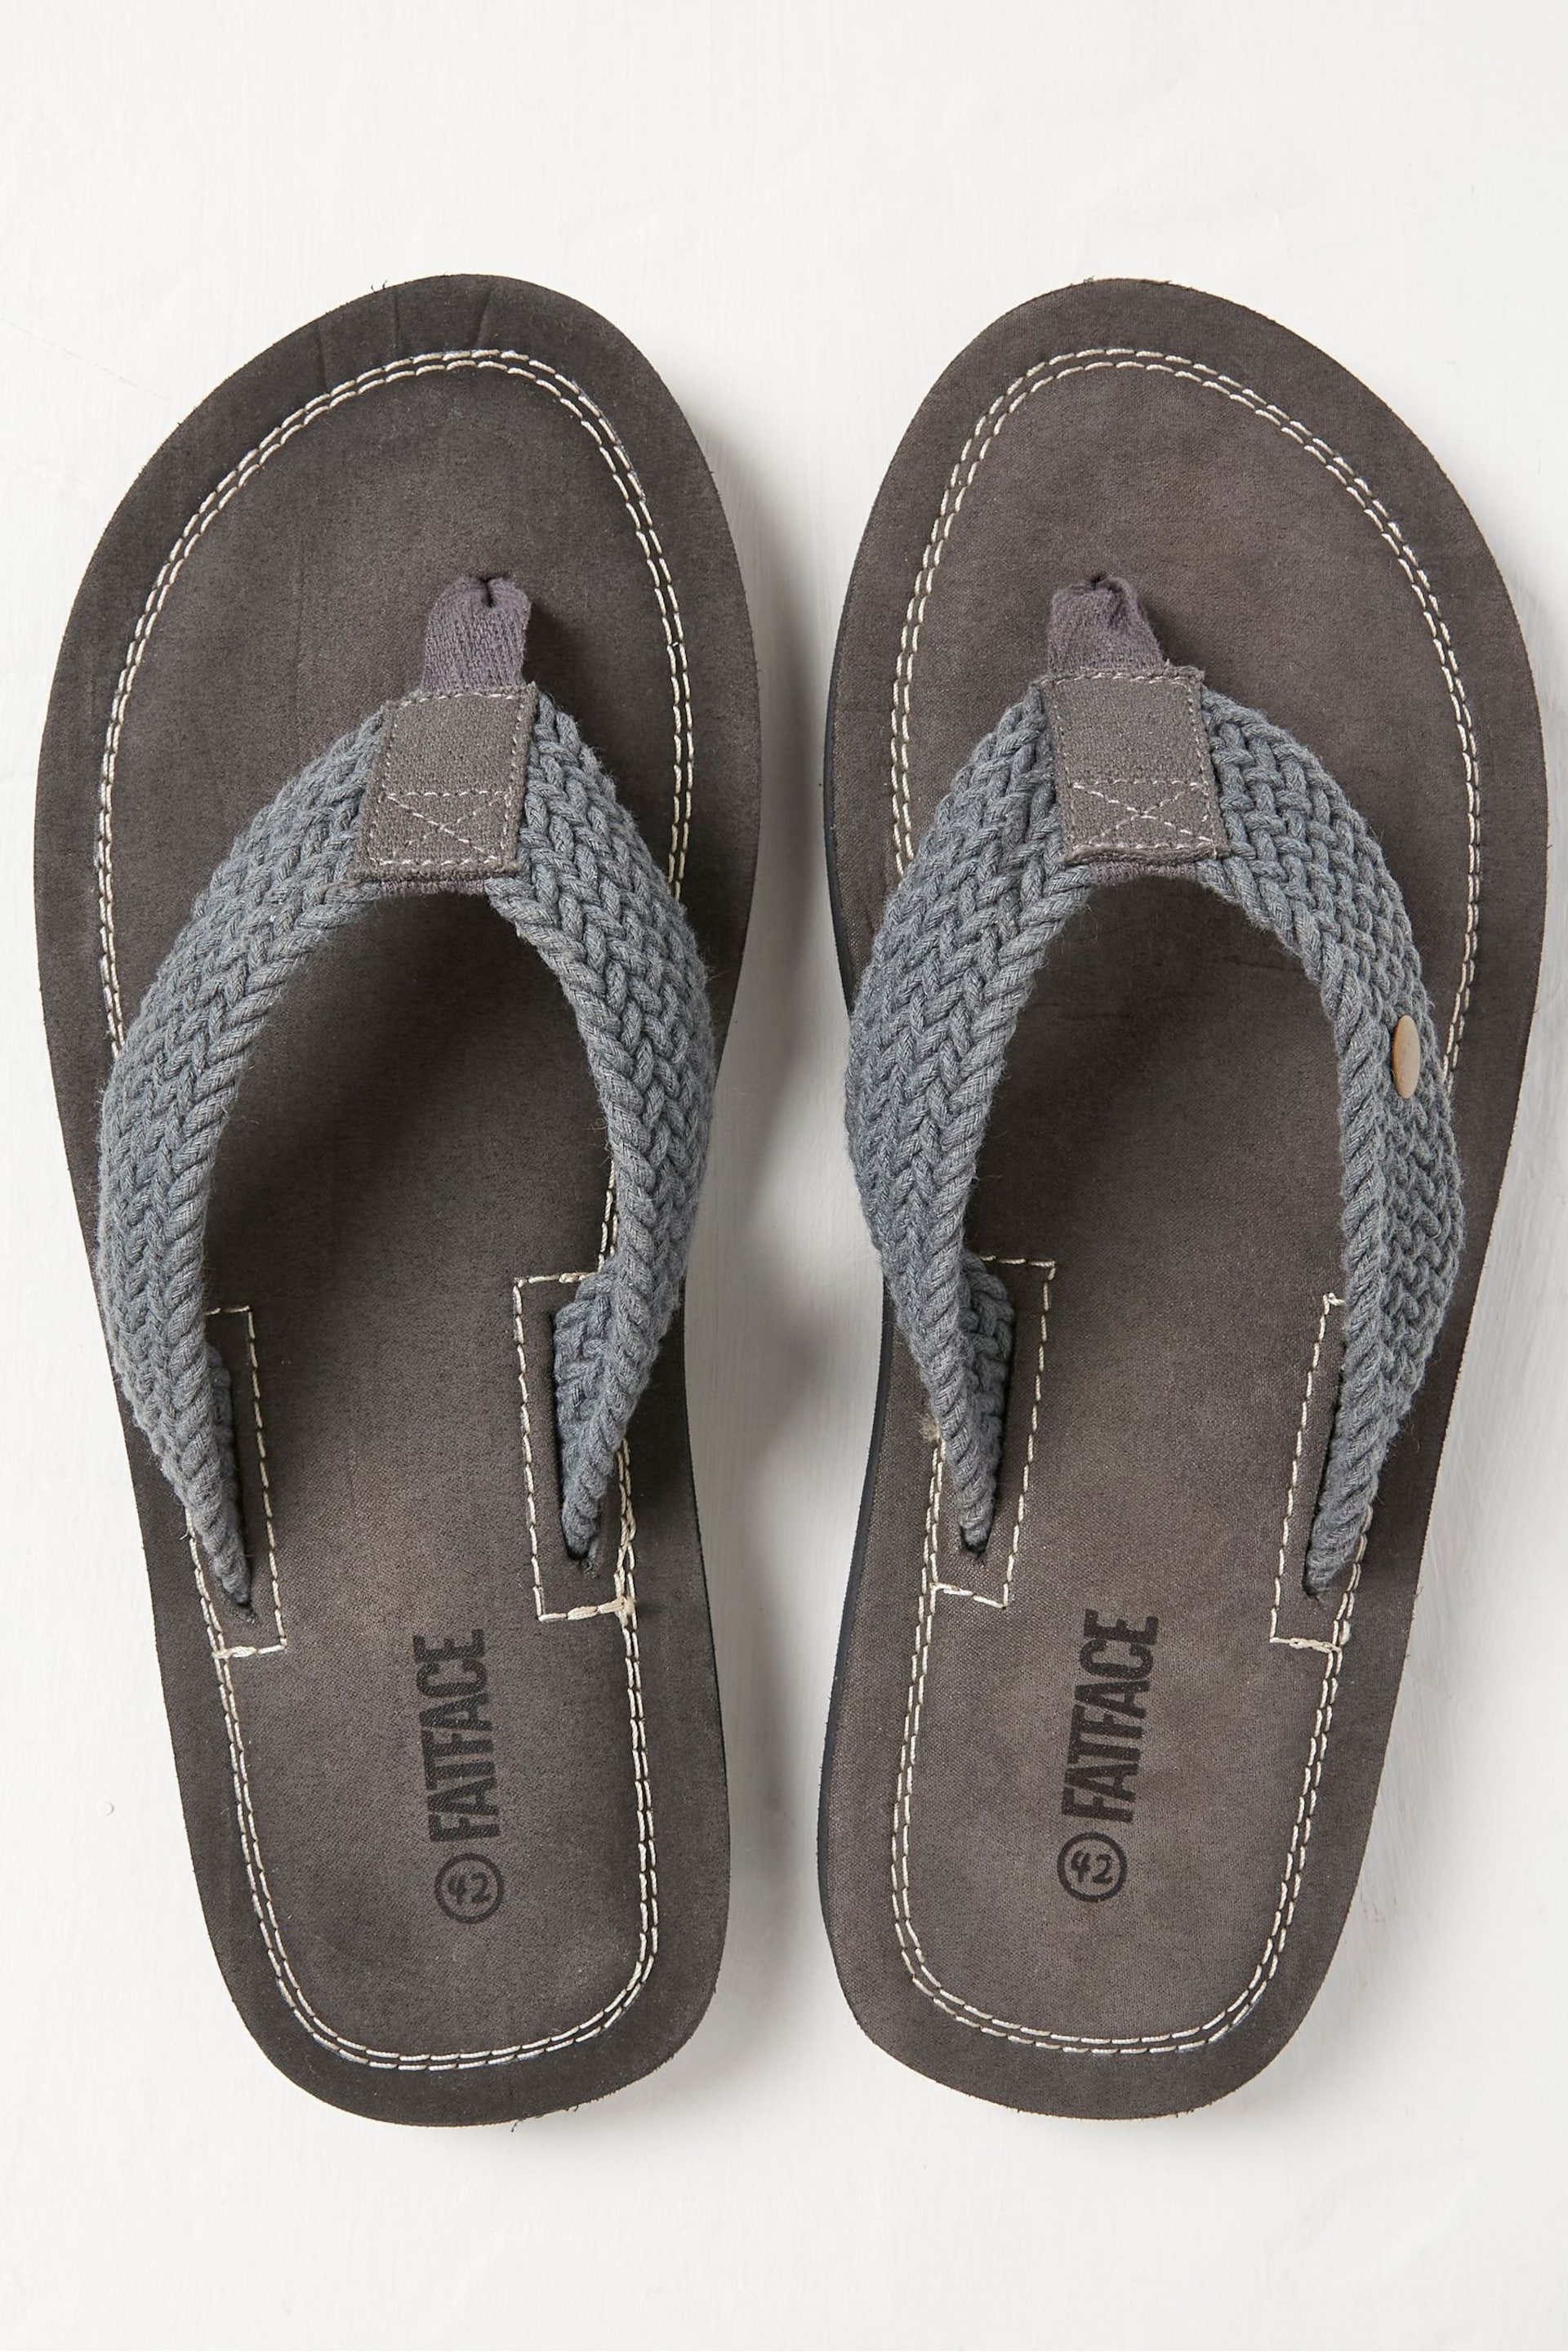 FatFace Grey Hayes Flip Flops - Image 2 of 3